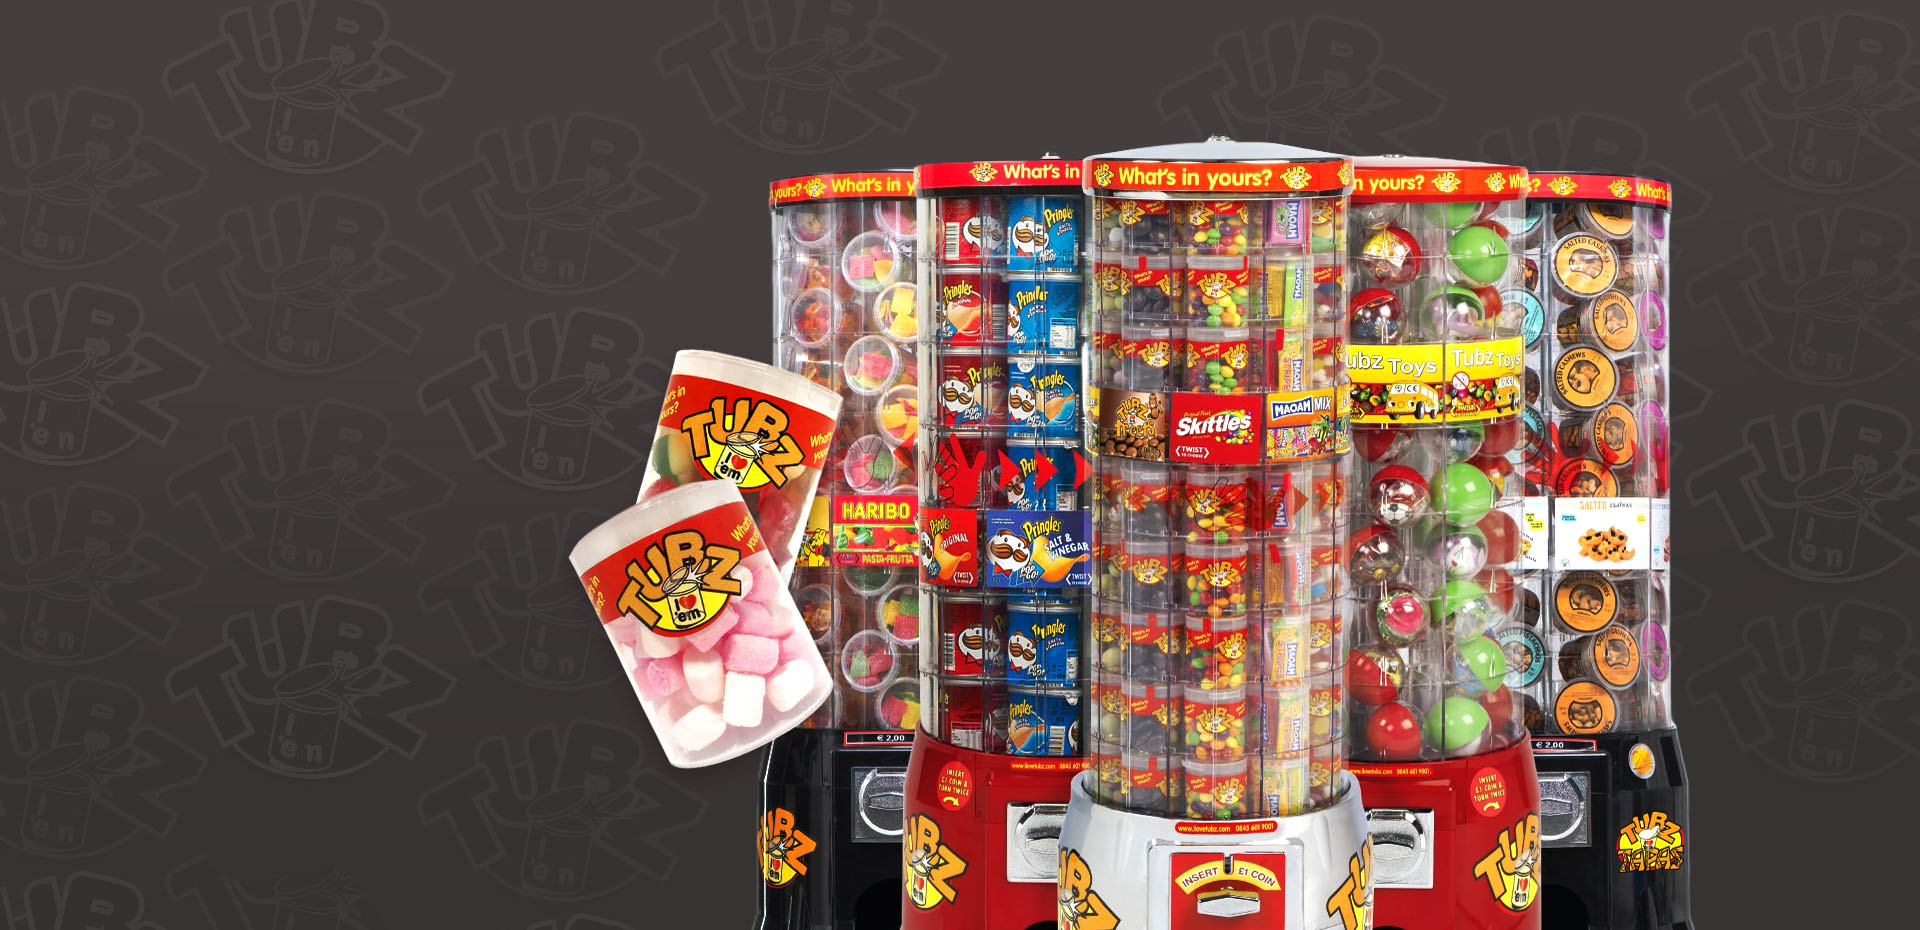 Installers Of Sweets Vending Machines For Soft Play Establishments Loughbrough